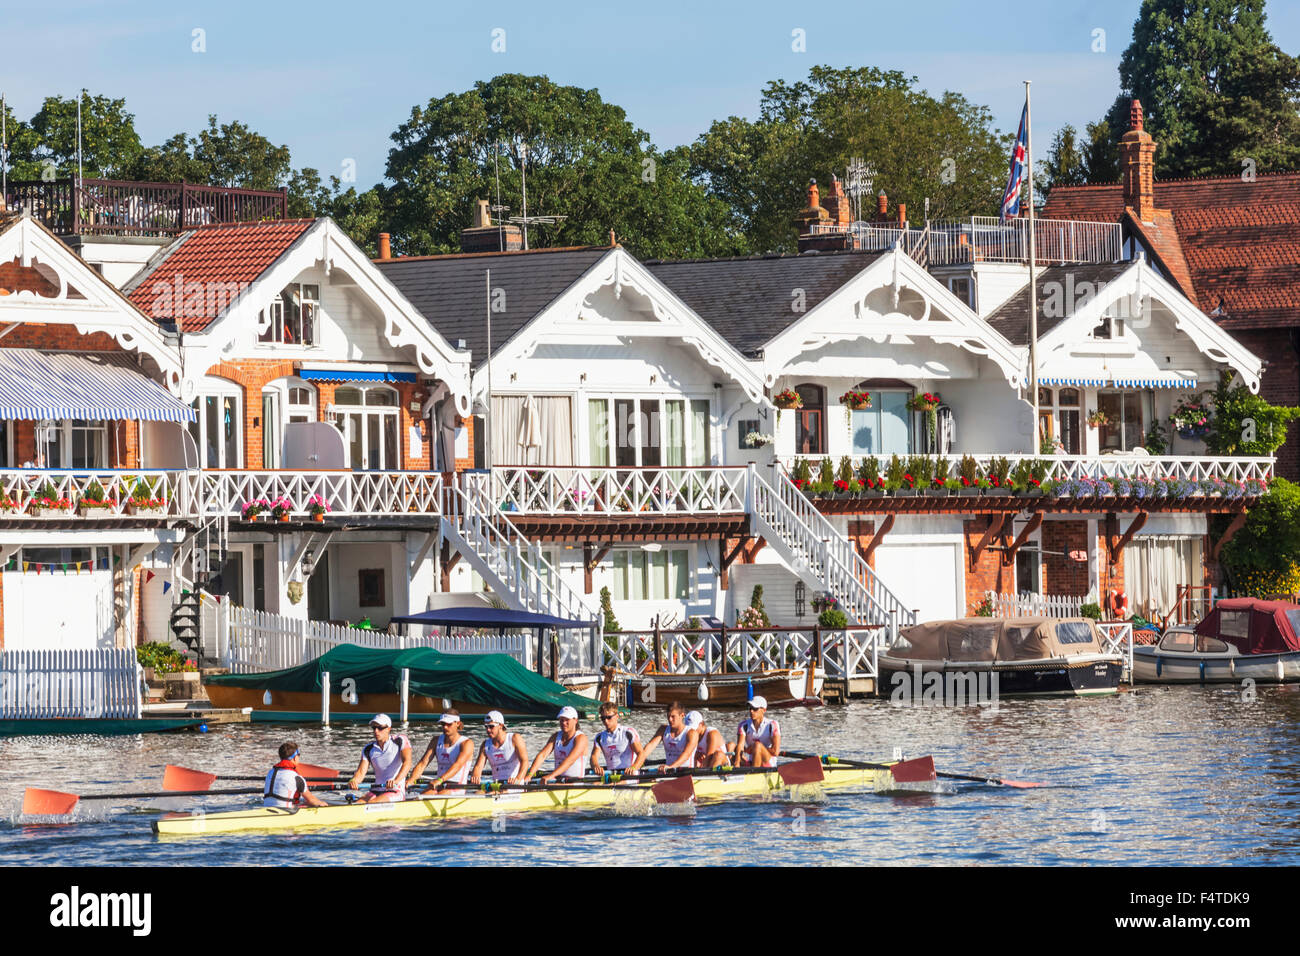 England, Oxfordshire, Henley-on-Thames, Boathouses and Rowers on River Thames Stock Photo